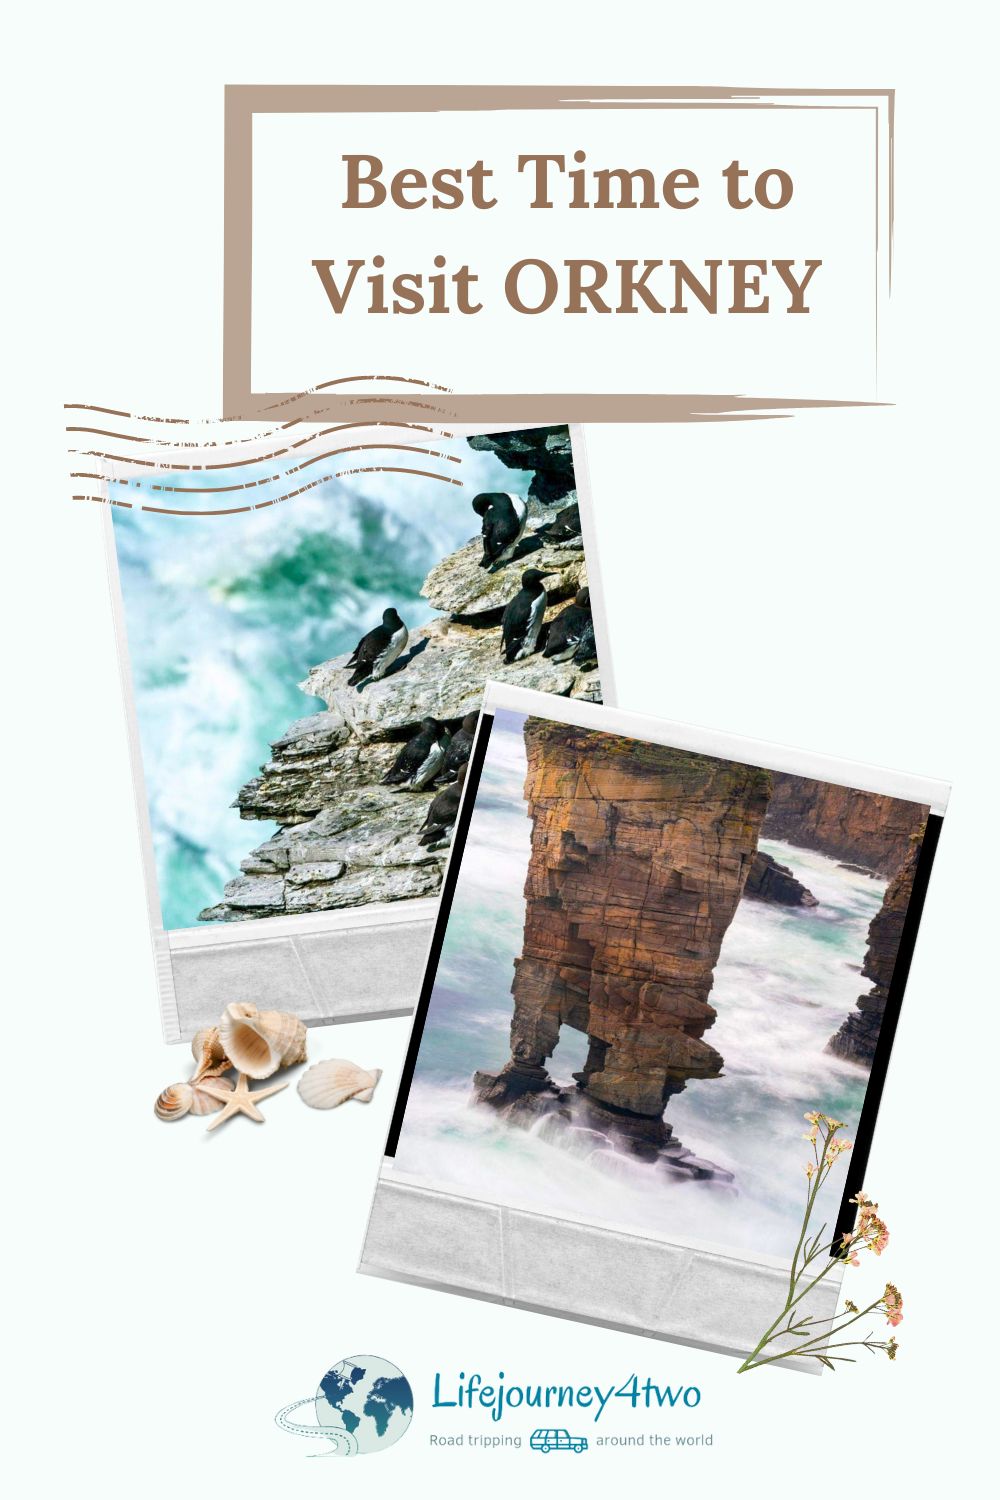 Best time to visit Orkney Pinterest pin